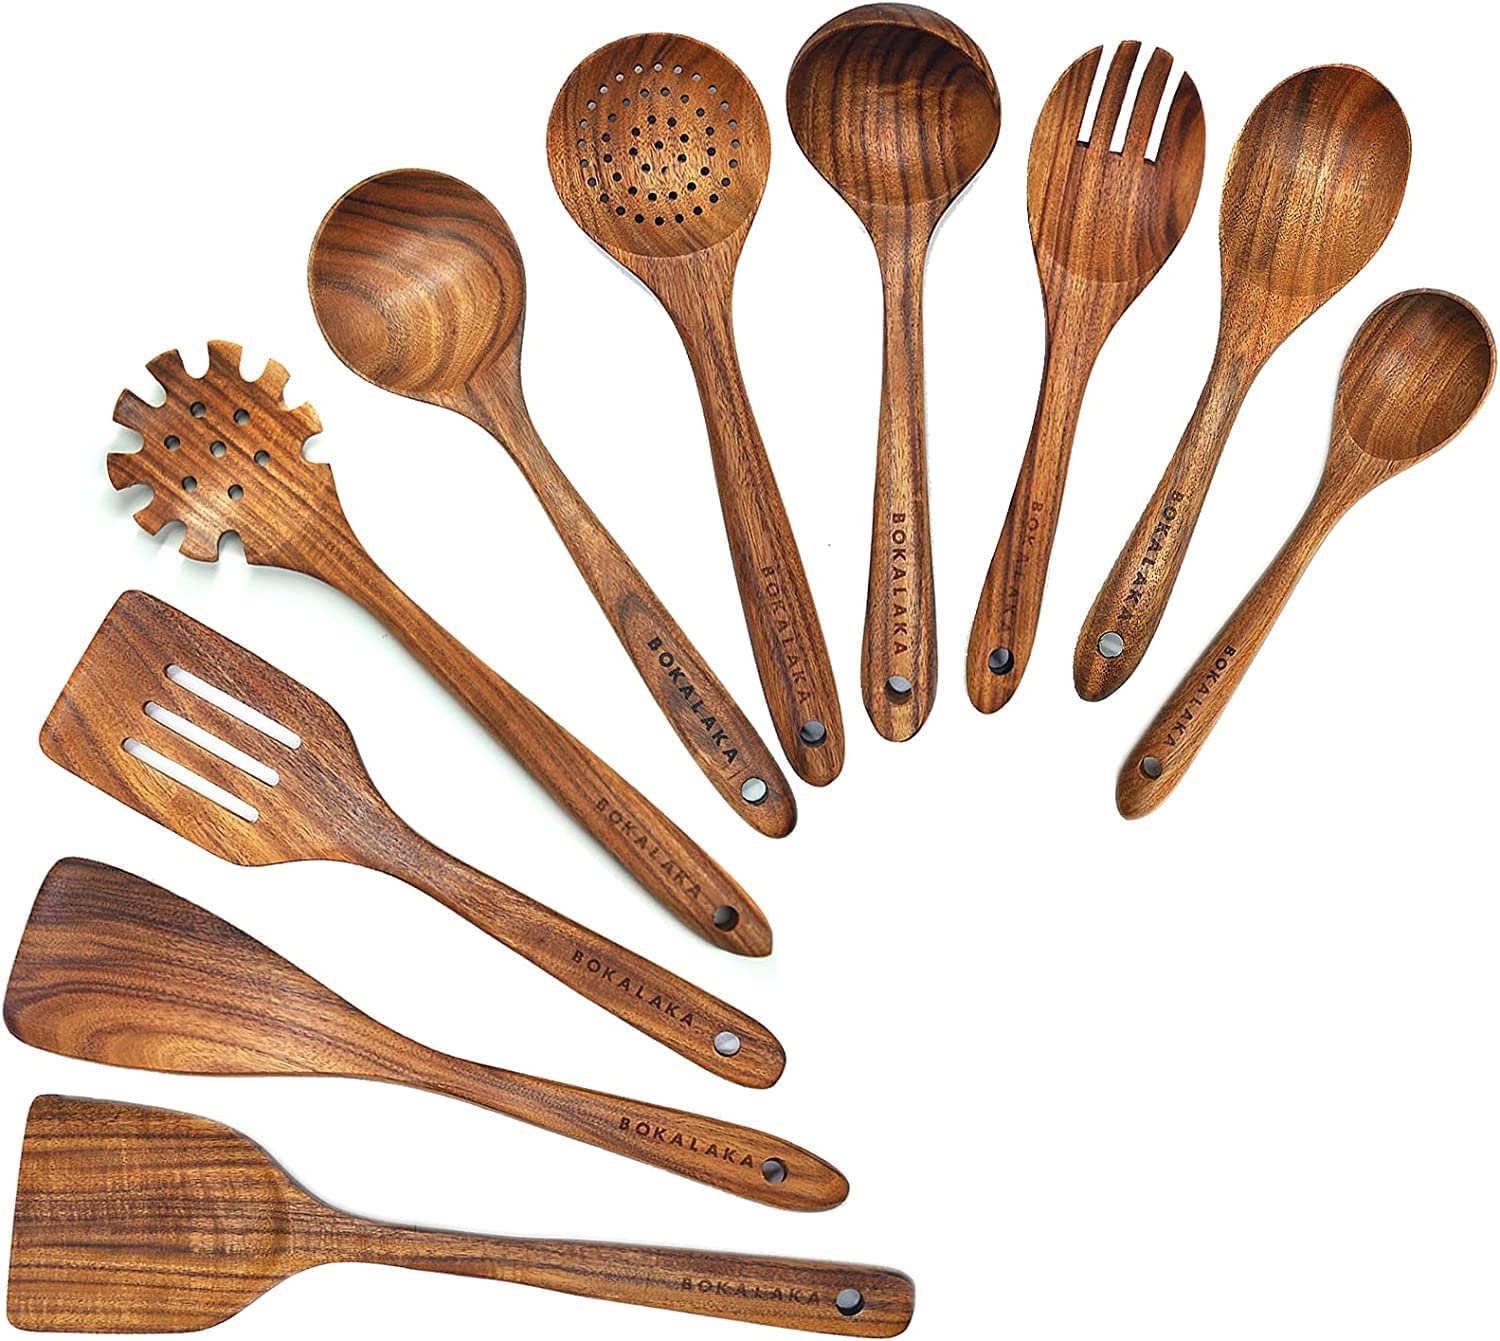 https://discounttoday.net/wp-content/uploads/2022/12/BOKALAKA-Wooden-Spoons-for-Cooking10-Pcs-Natural-Teak-Wooden-Kitchen-Utensils-Set-Wooden-Utensils-for-Cooking-Wooden-Cooking-Utensils-Wooden-Spatulas-for-Cooking.jpg